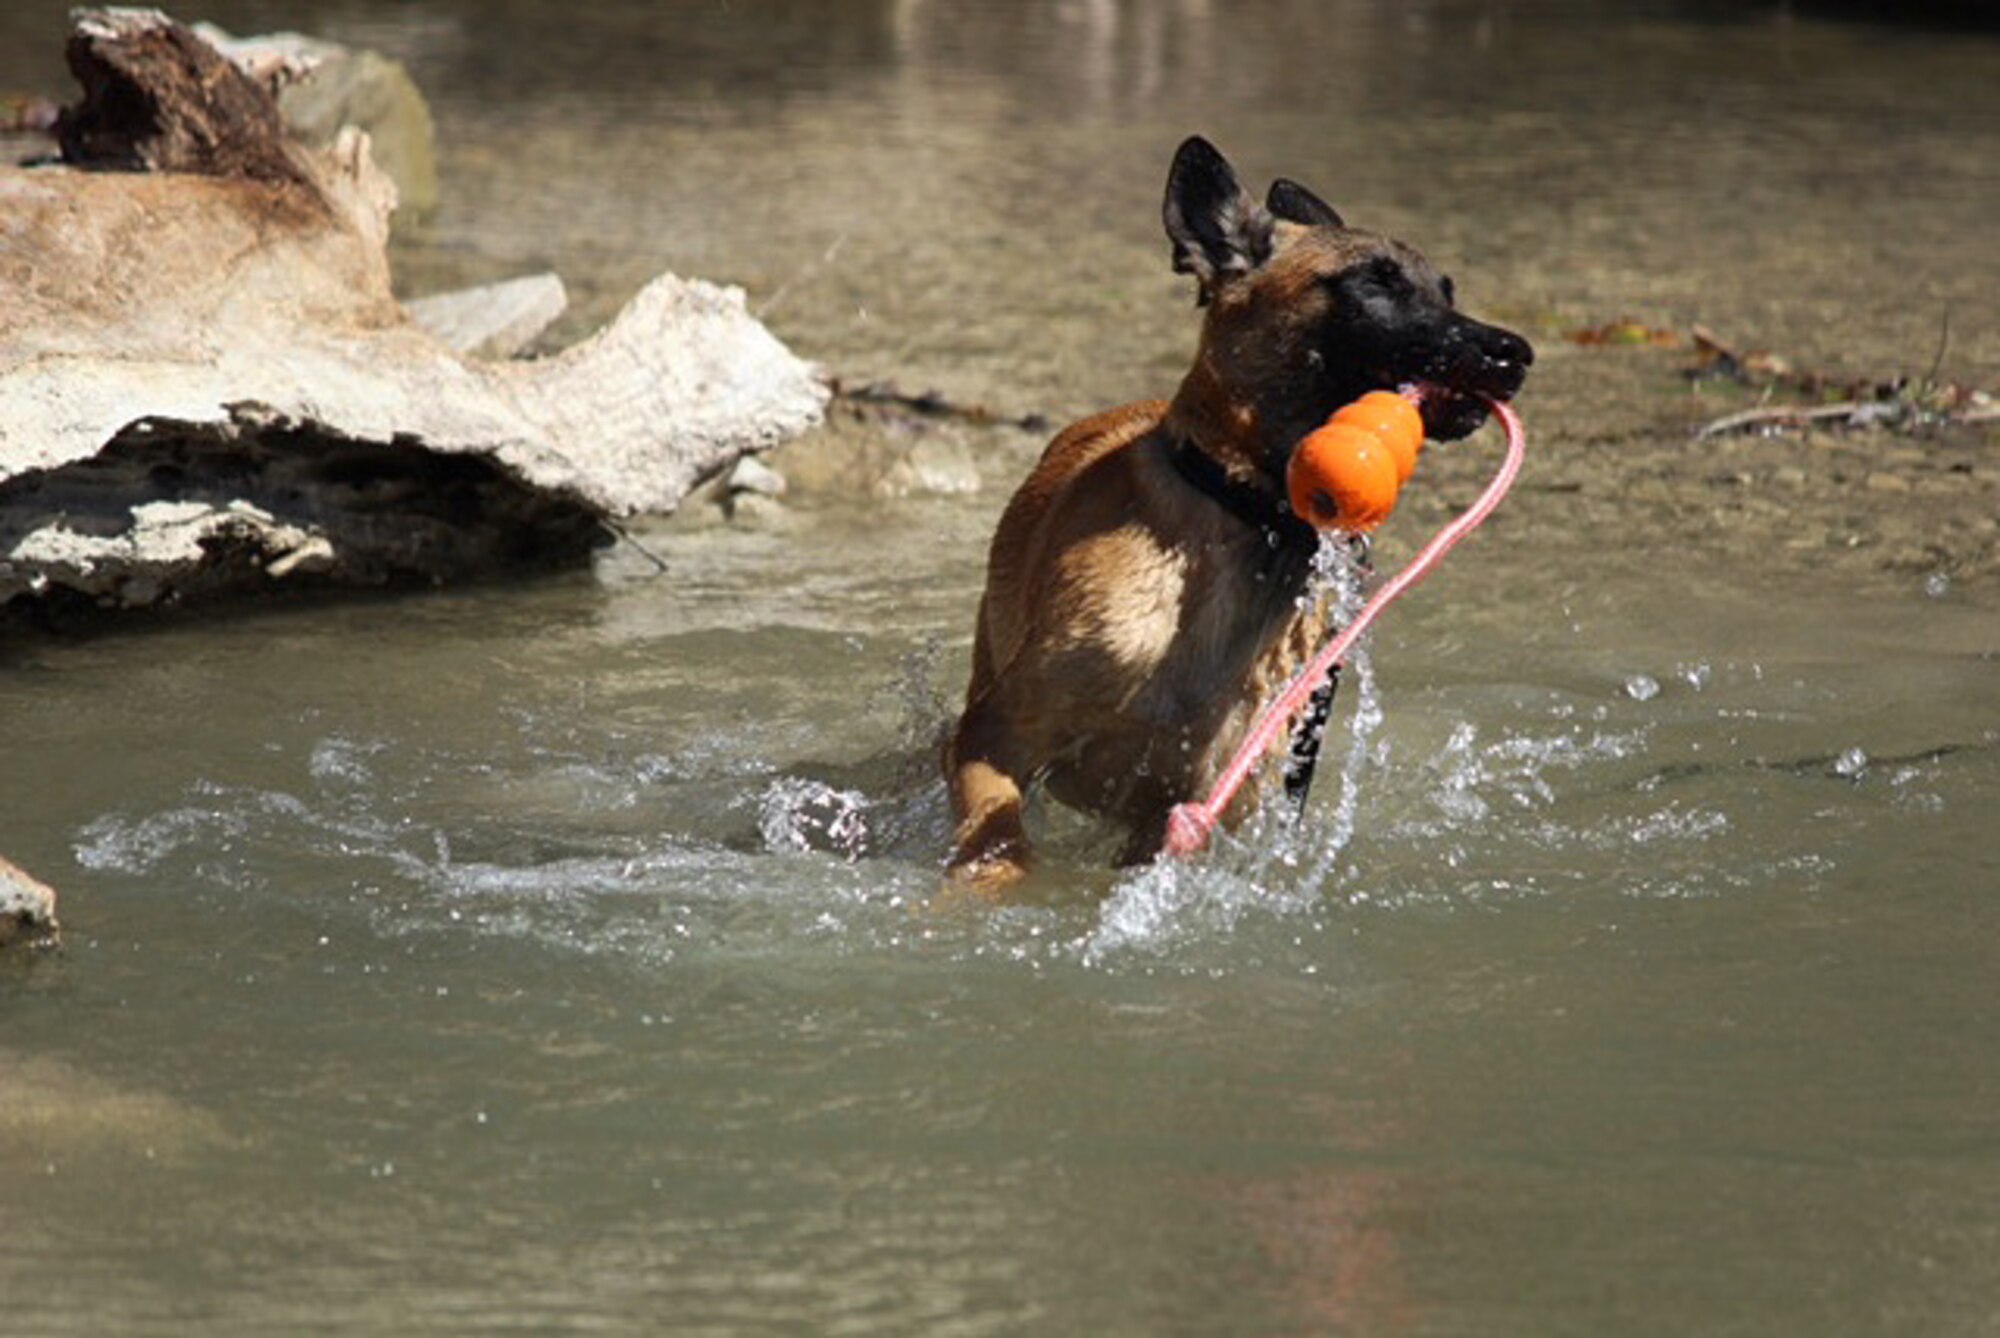 YYork, a military working dog in training with the Department of Defense’s Military Working Dog Breeding Program, is pictured playing with toy in water. YYork is currently being fostered by Col. Susan M. Dickens, commander of the 149th Mission Support Group, Texas Air National Guard, a subordinate unit of the 149th Fighter Wing, at JBSA-Lackland. (Photo courtesy of Col. Susan Dickens / Released)